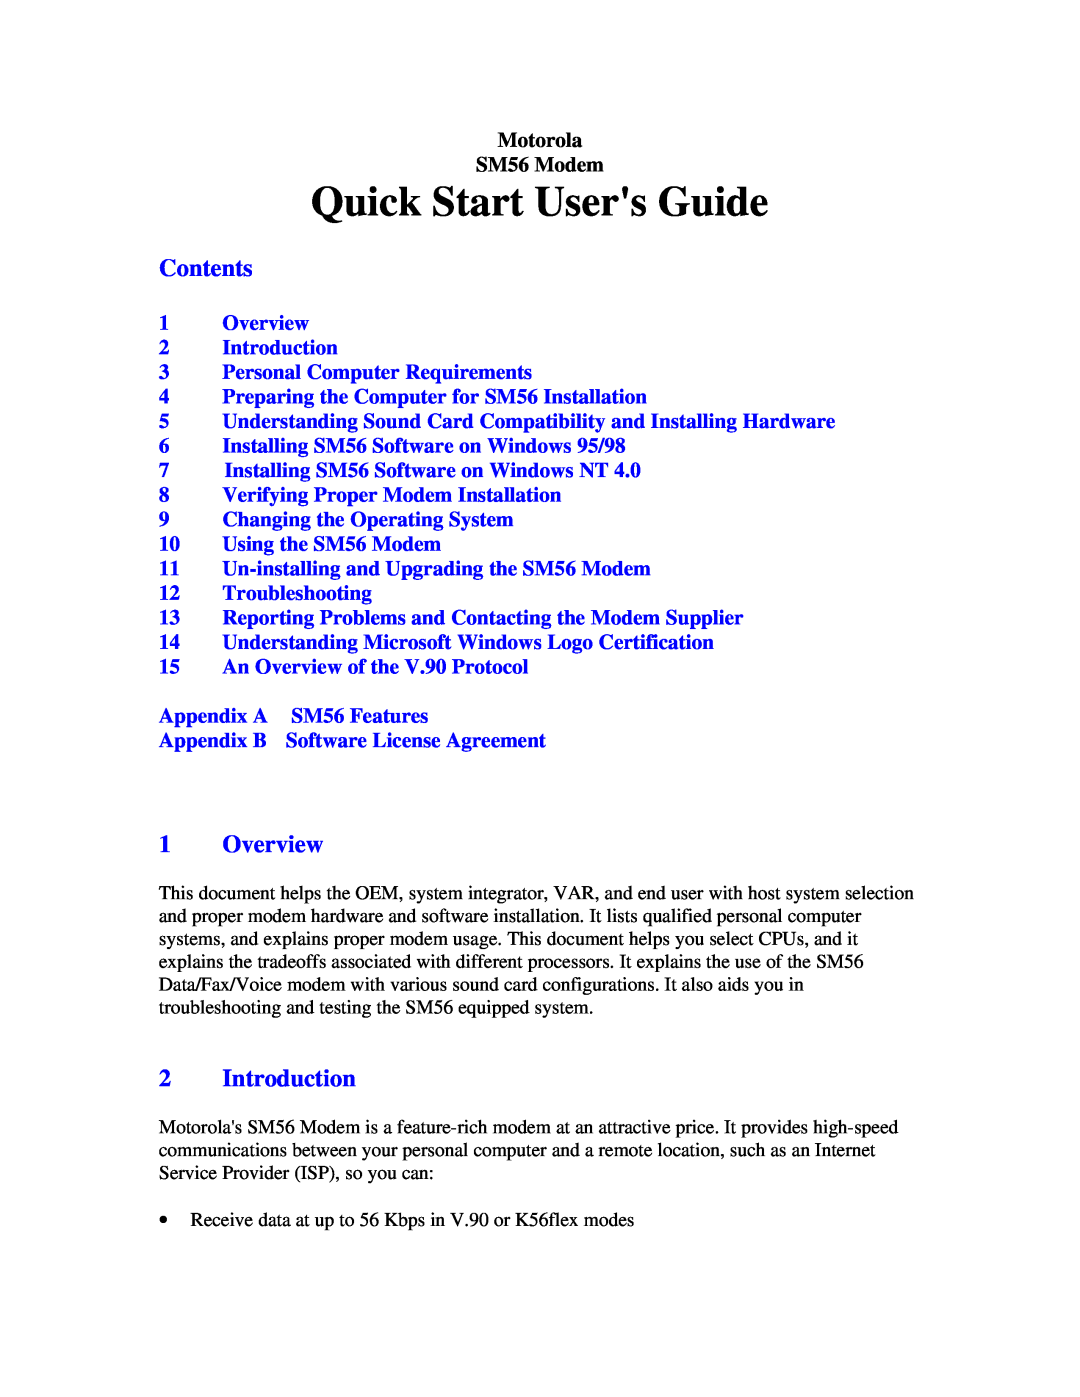 Motorola SM56 quick start Contents, Overview, Introduction, Quick Start Users Guide 